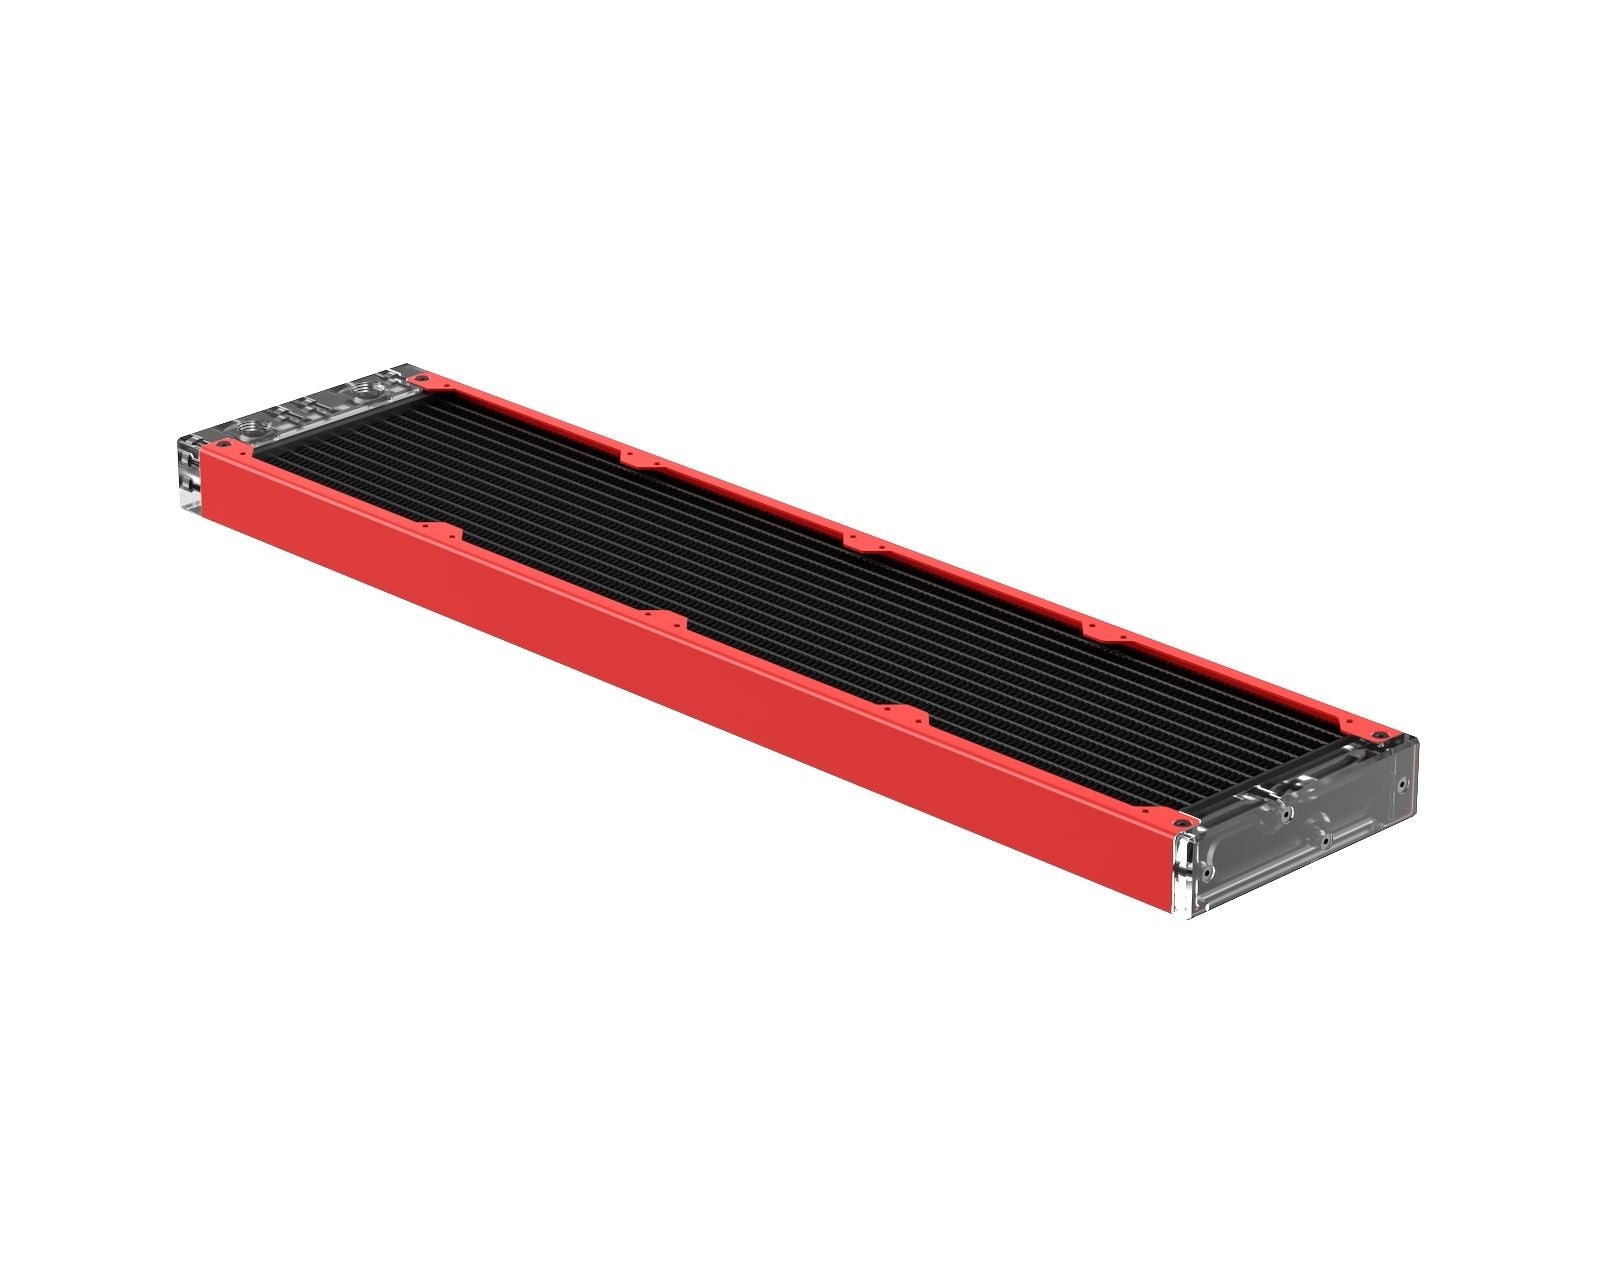 PrimoChill 480SL (30mm) EXIMO Modular Radiator, Clear Acrylic, 4x120mm, Quad Fan (R-SL-A48) Available in 20+ Colors, Assembled in USA and Custom Watercooling Loop Ready - Razor Red